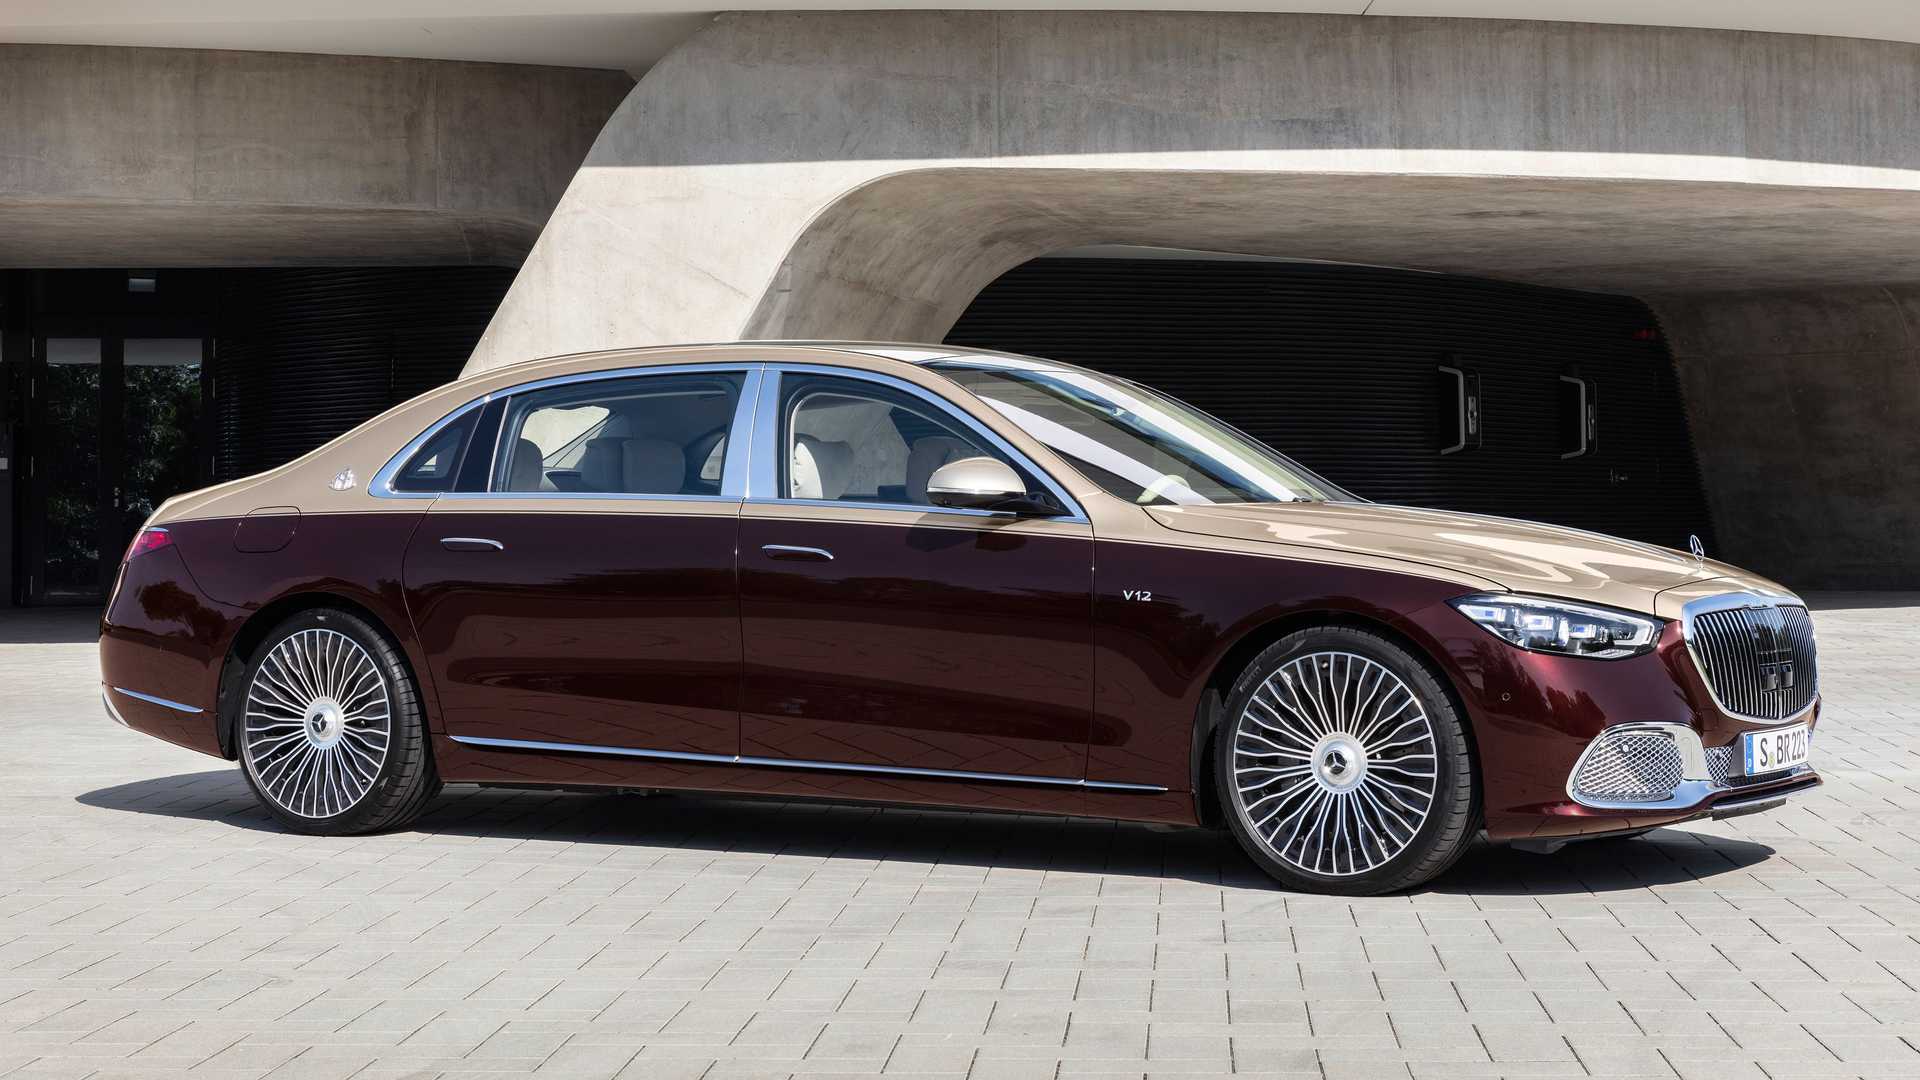 image showing the side profile of a two-tone (red & brown) Mercedes-Maybach S680